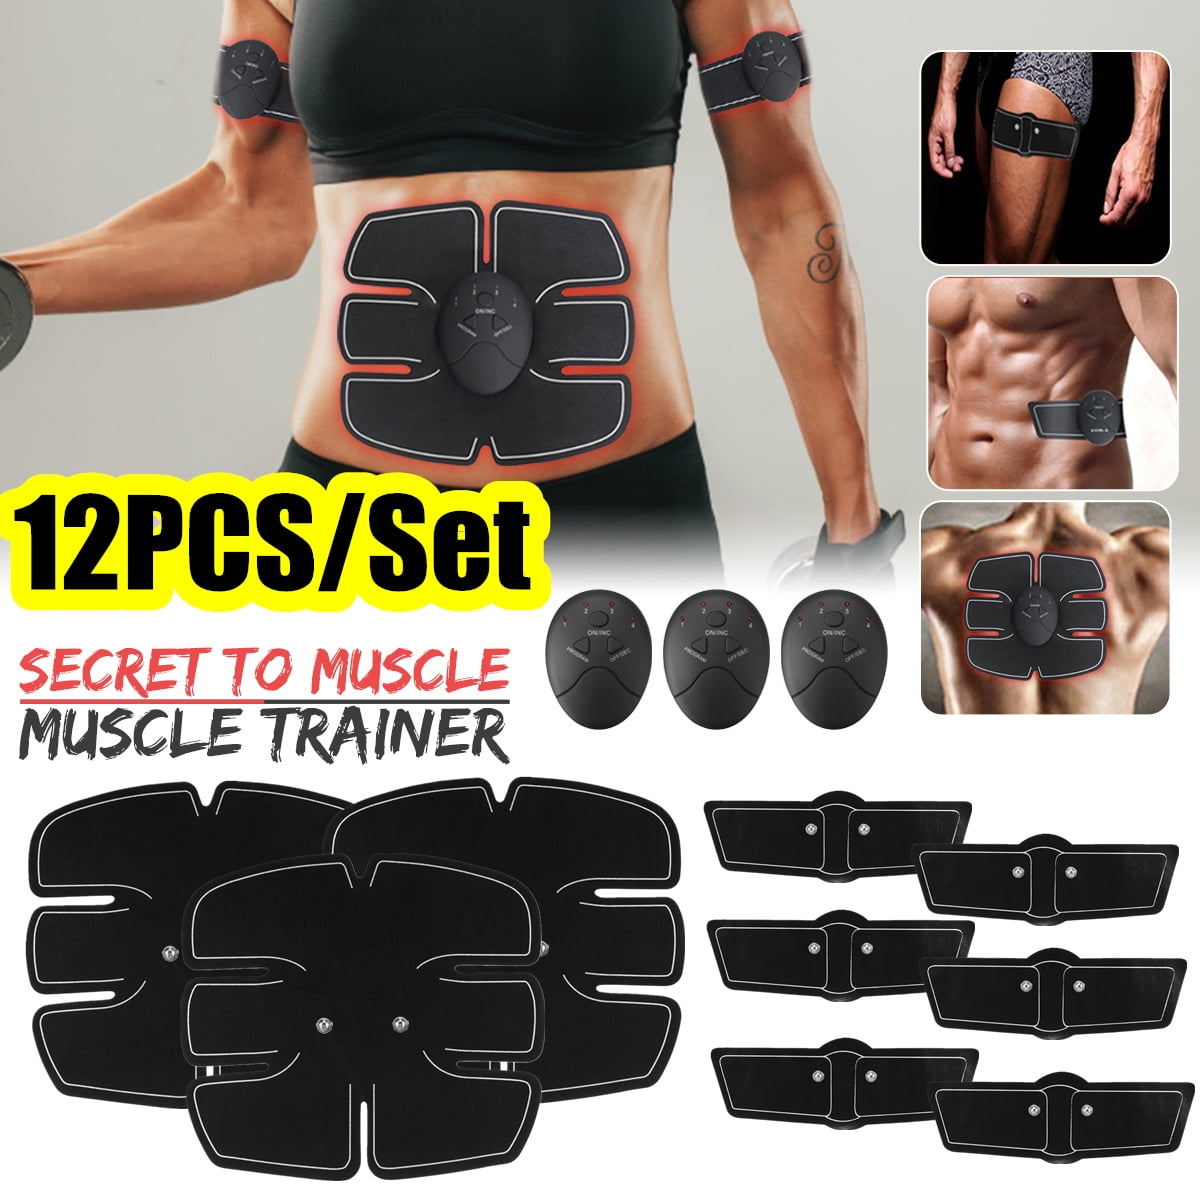 ABS Stimulator Toning Belt, EMS Abdominal Muscle Trainer Toning Belt Smart Training Body Building Ab Core Toners Home Workout Fitness